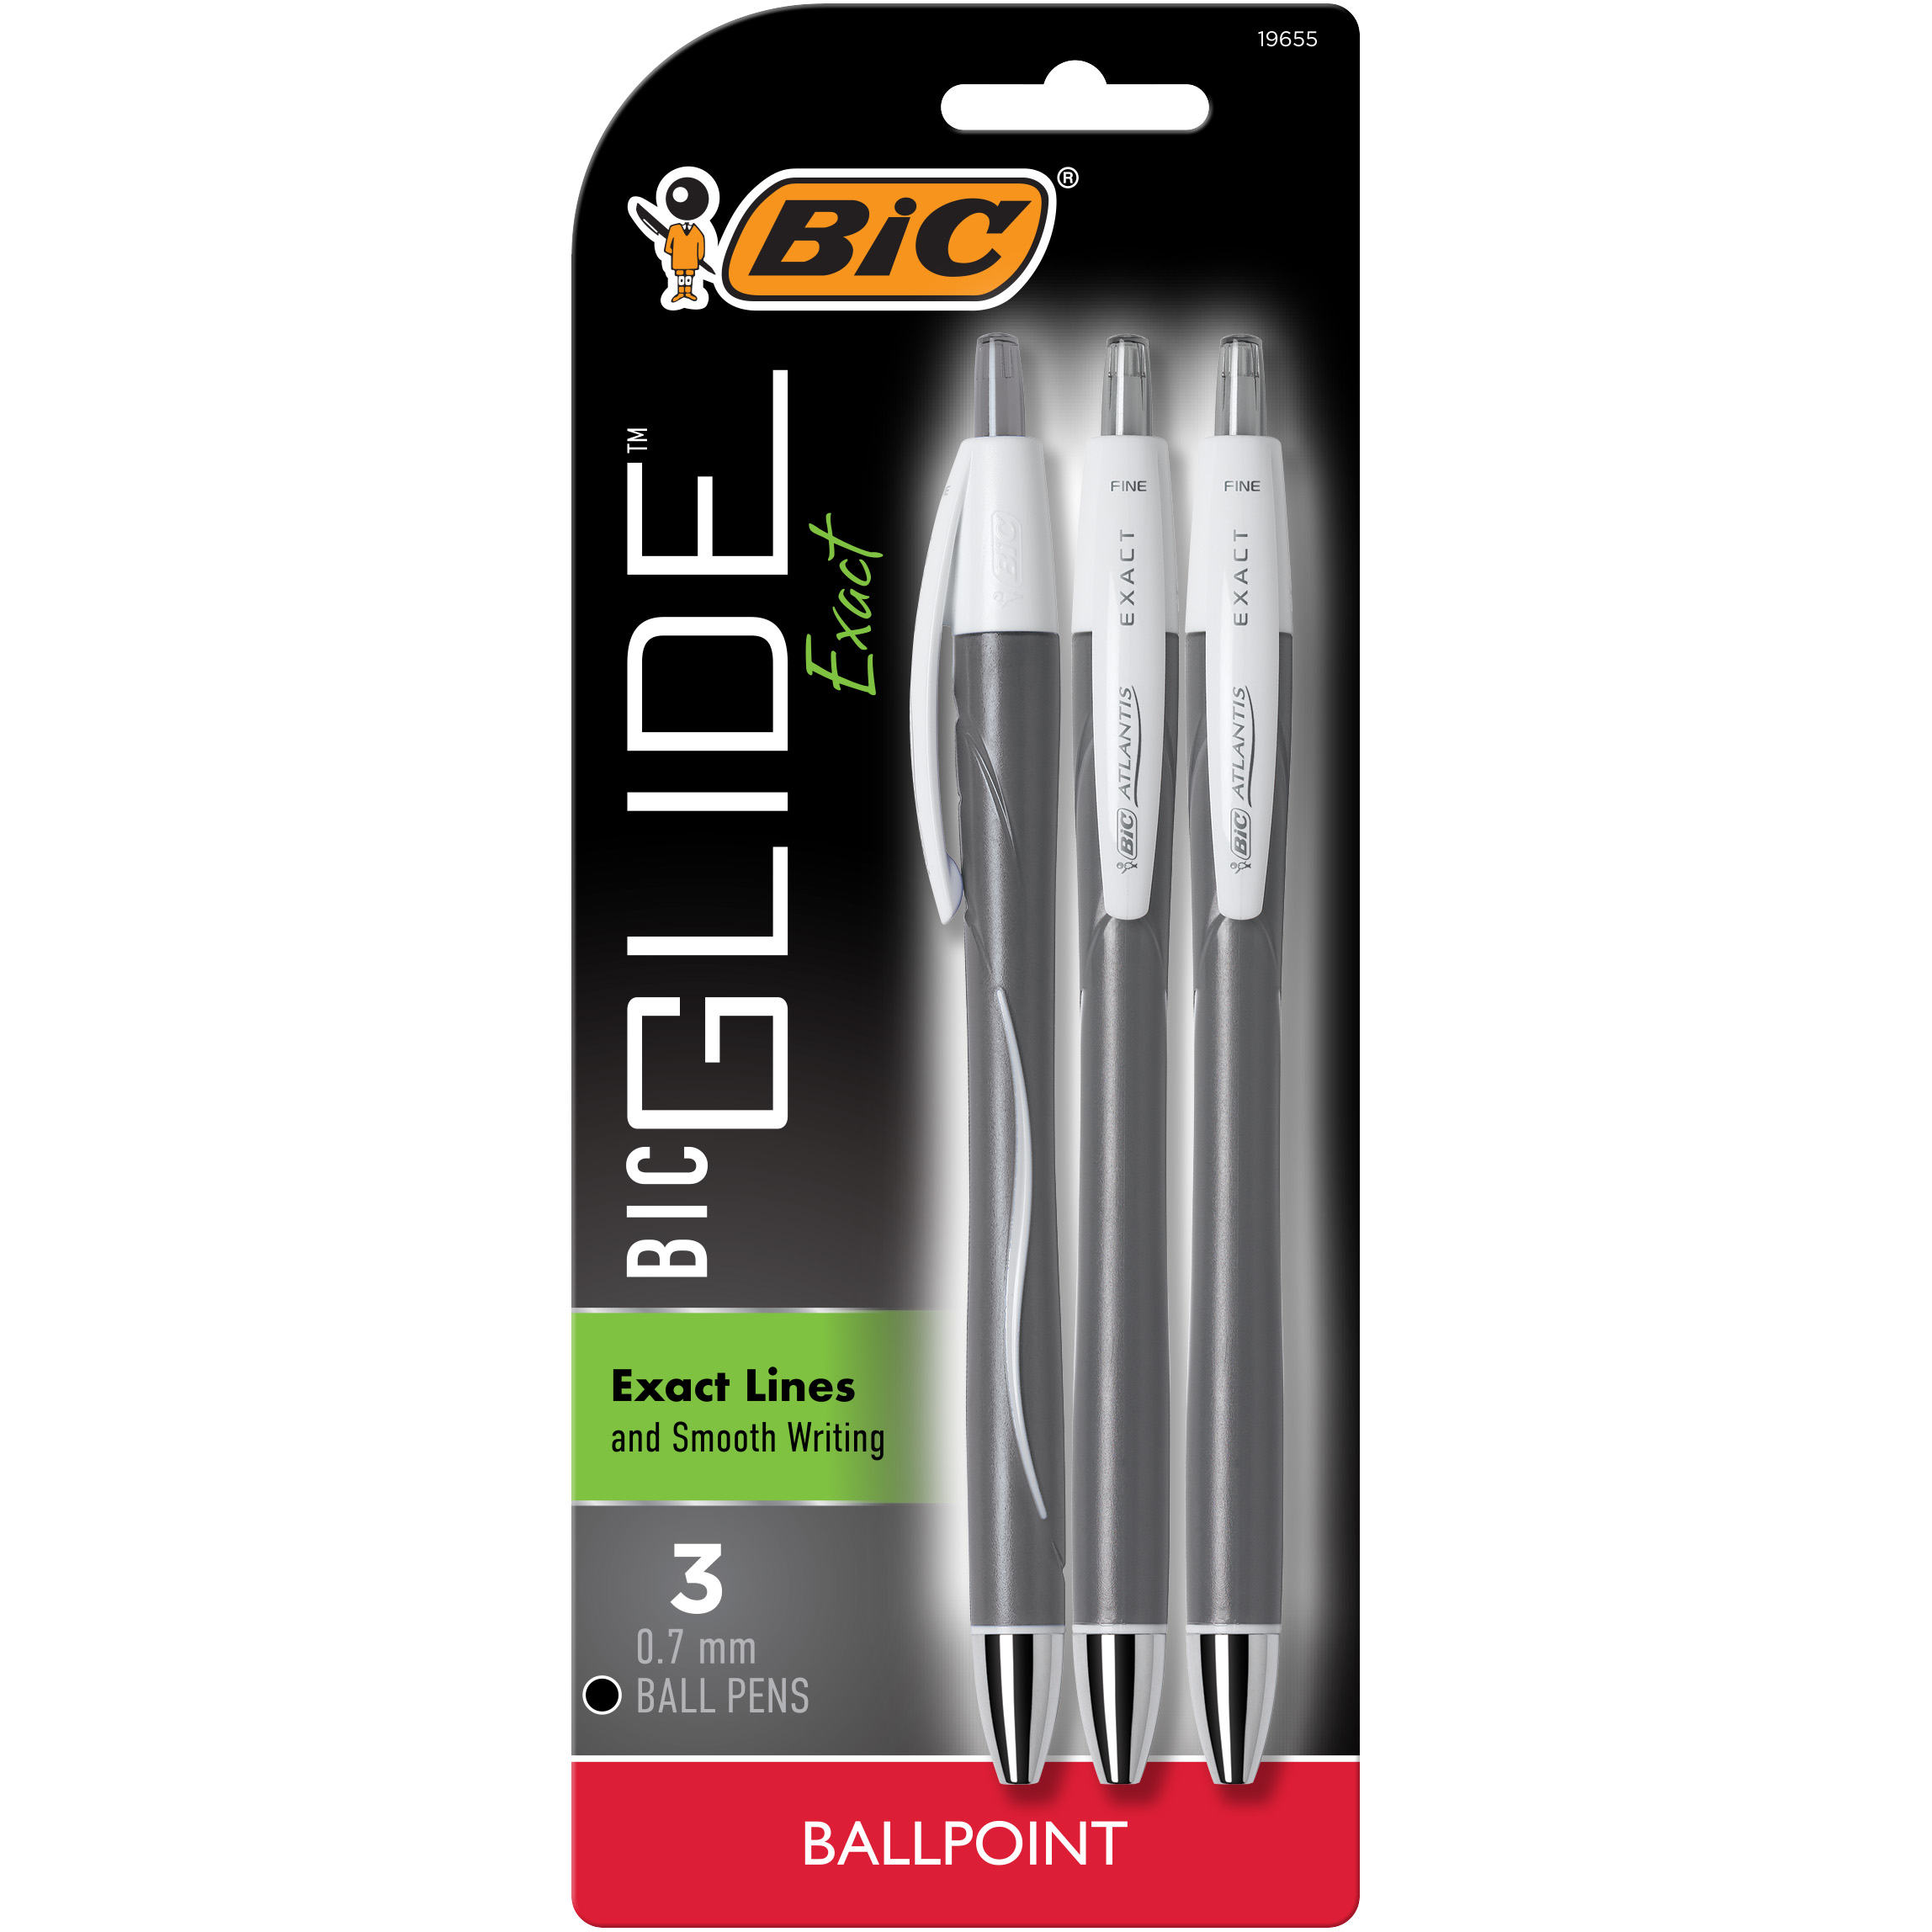 BIC Glide Exact Retractable Ball Point Pens, Fine Point, 0.7 mm, Black Ink, Pack of 3 - image 1 of 8